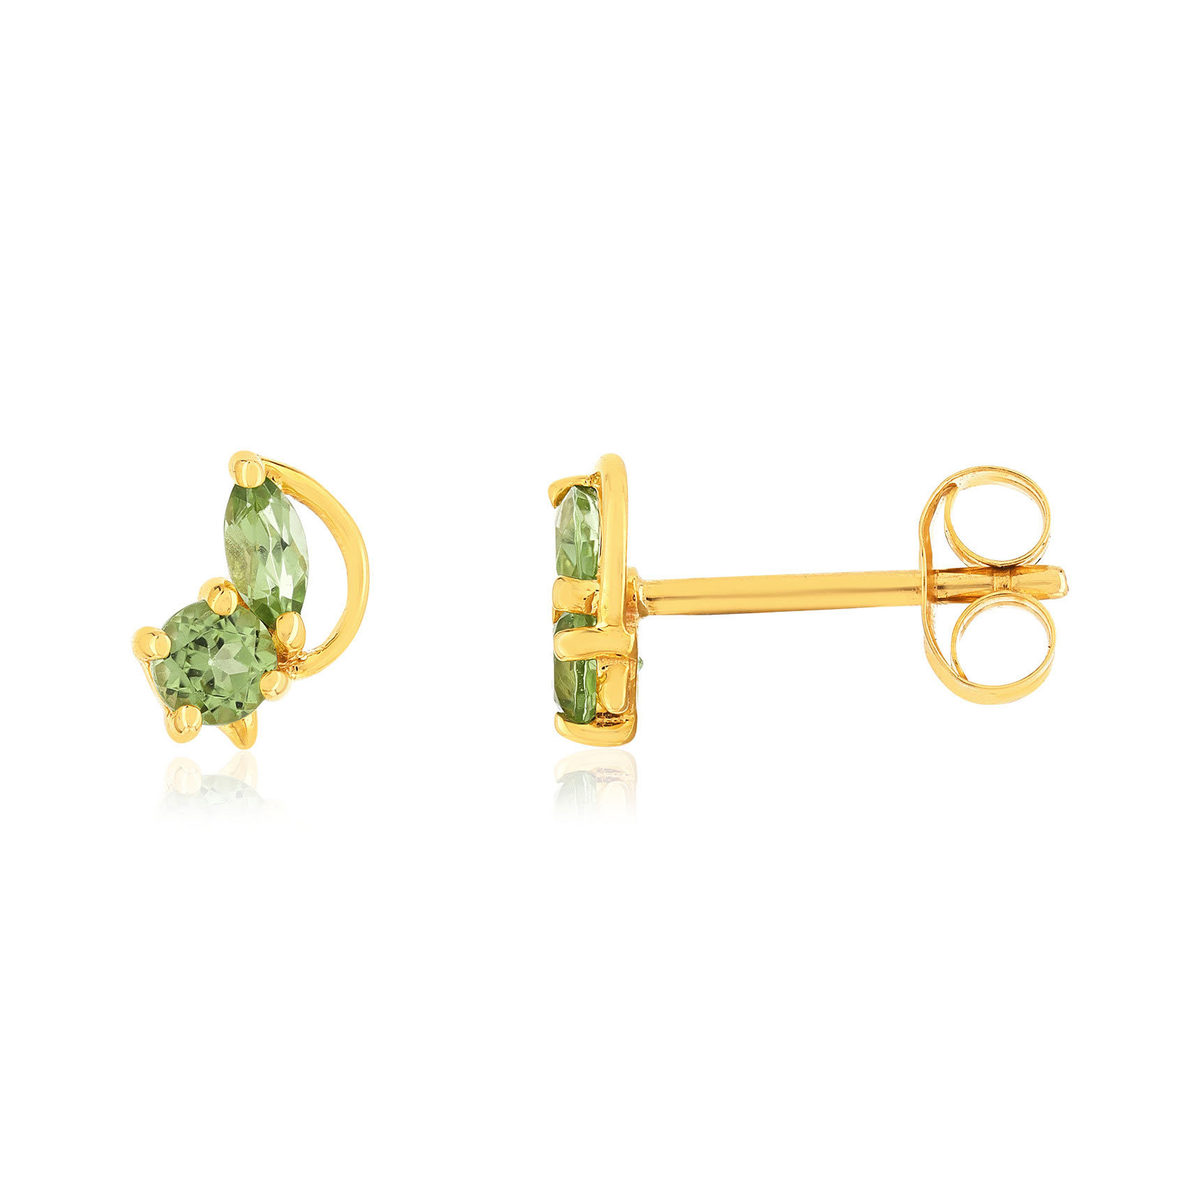 Boucles d'oreille or 375 jaune peridots